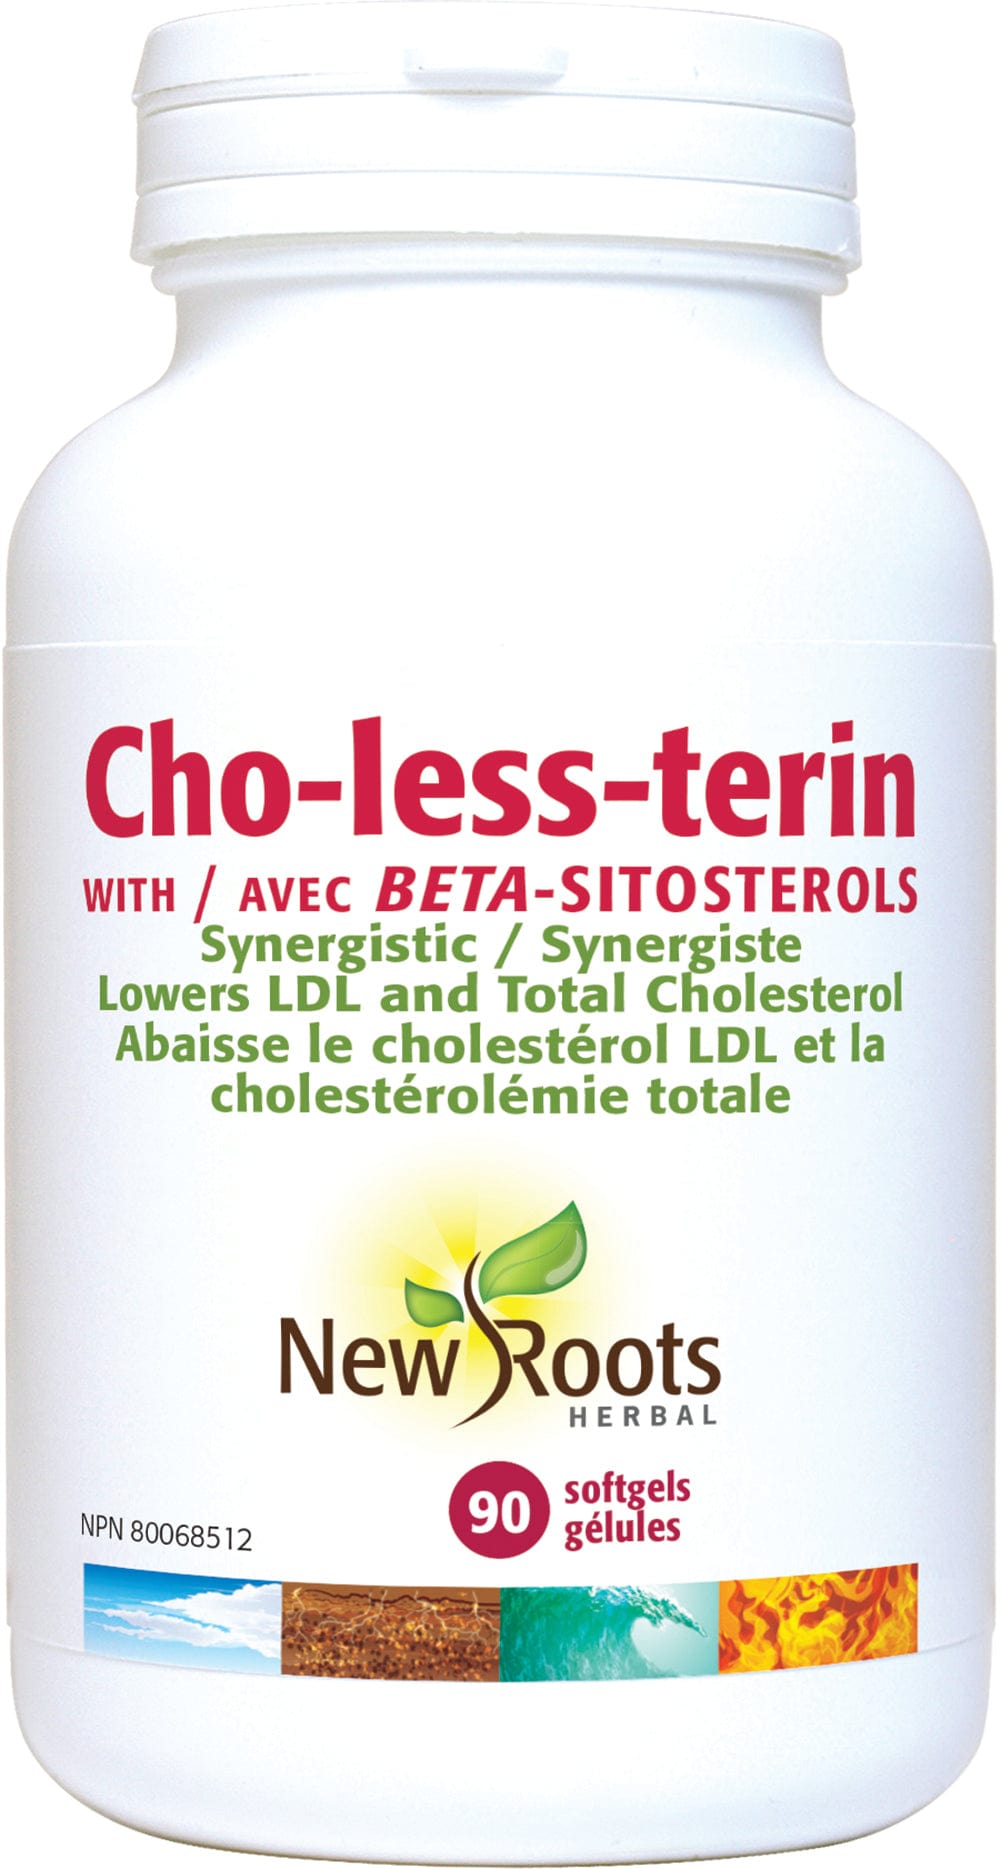 NEW ROOTS HERBAL Suppléments Cho-less-terin 90gel